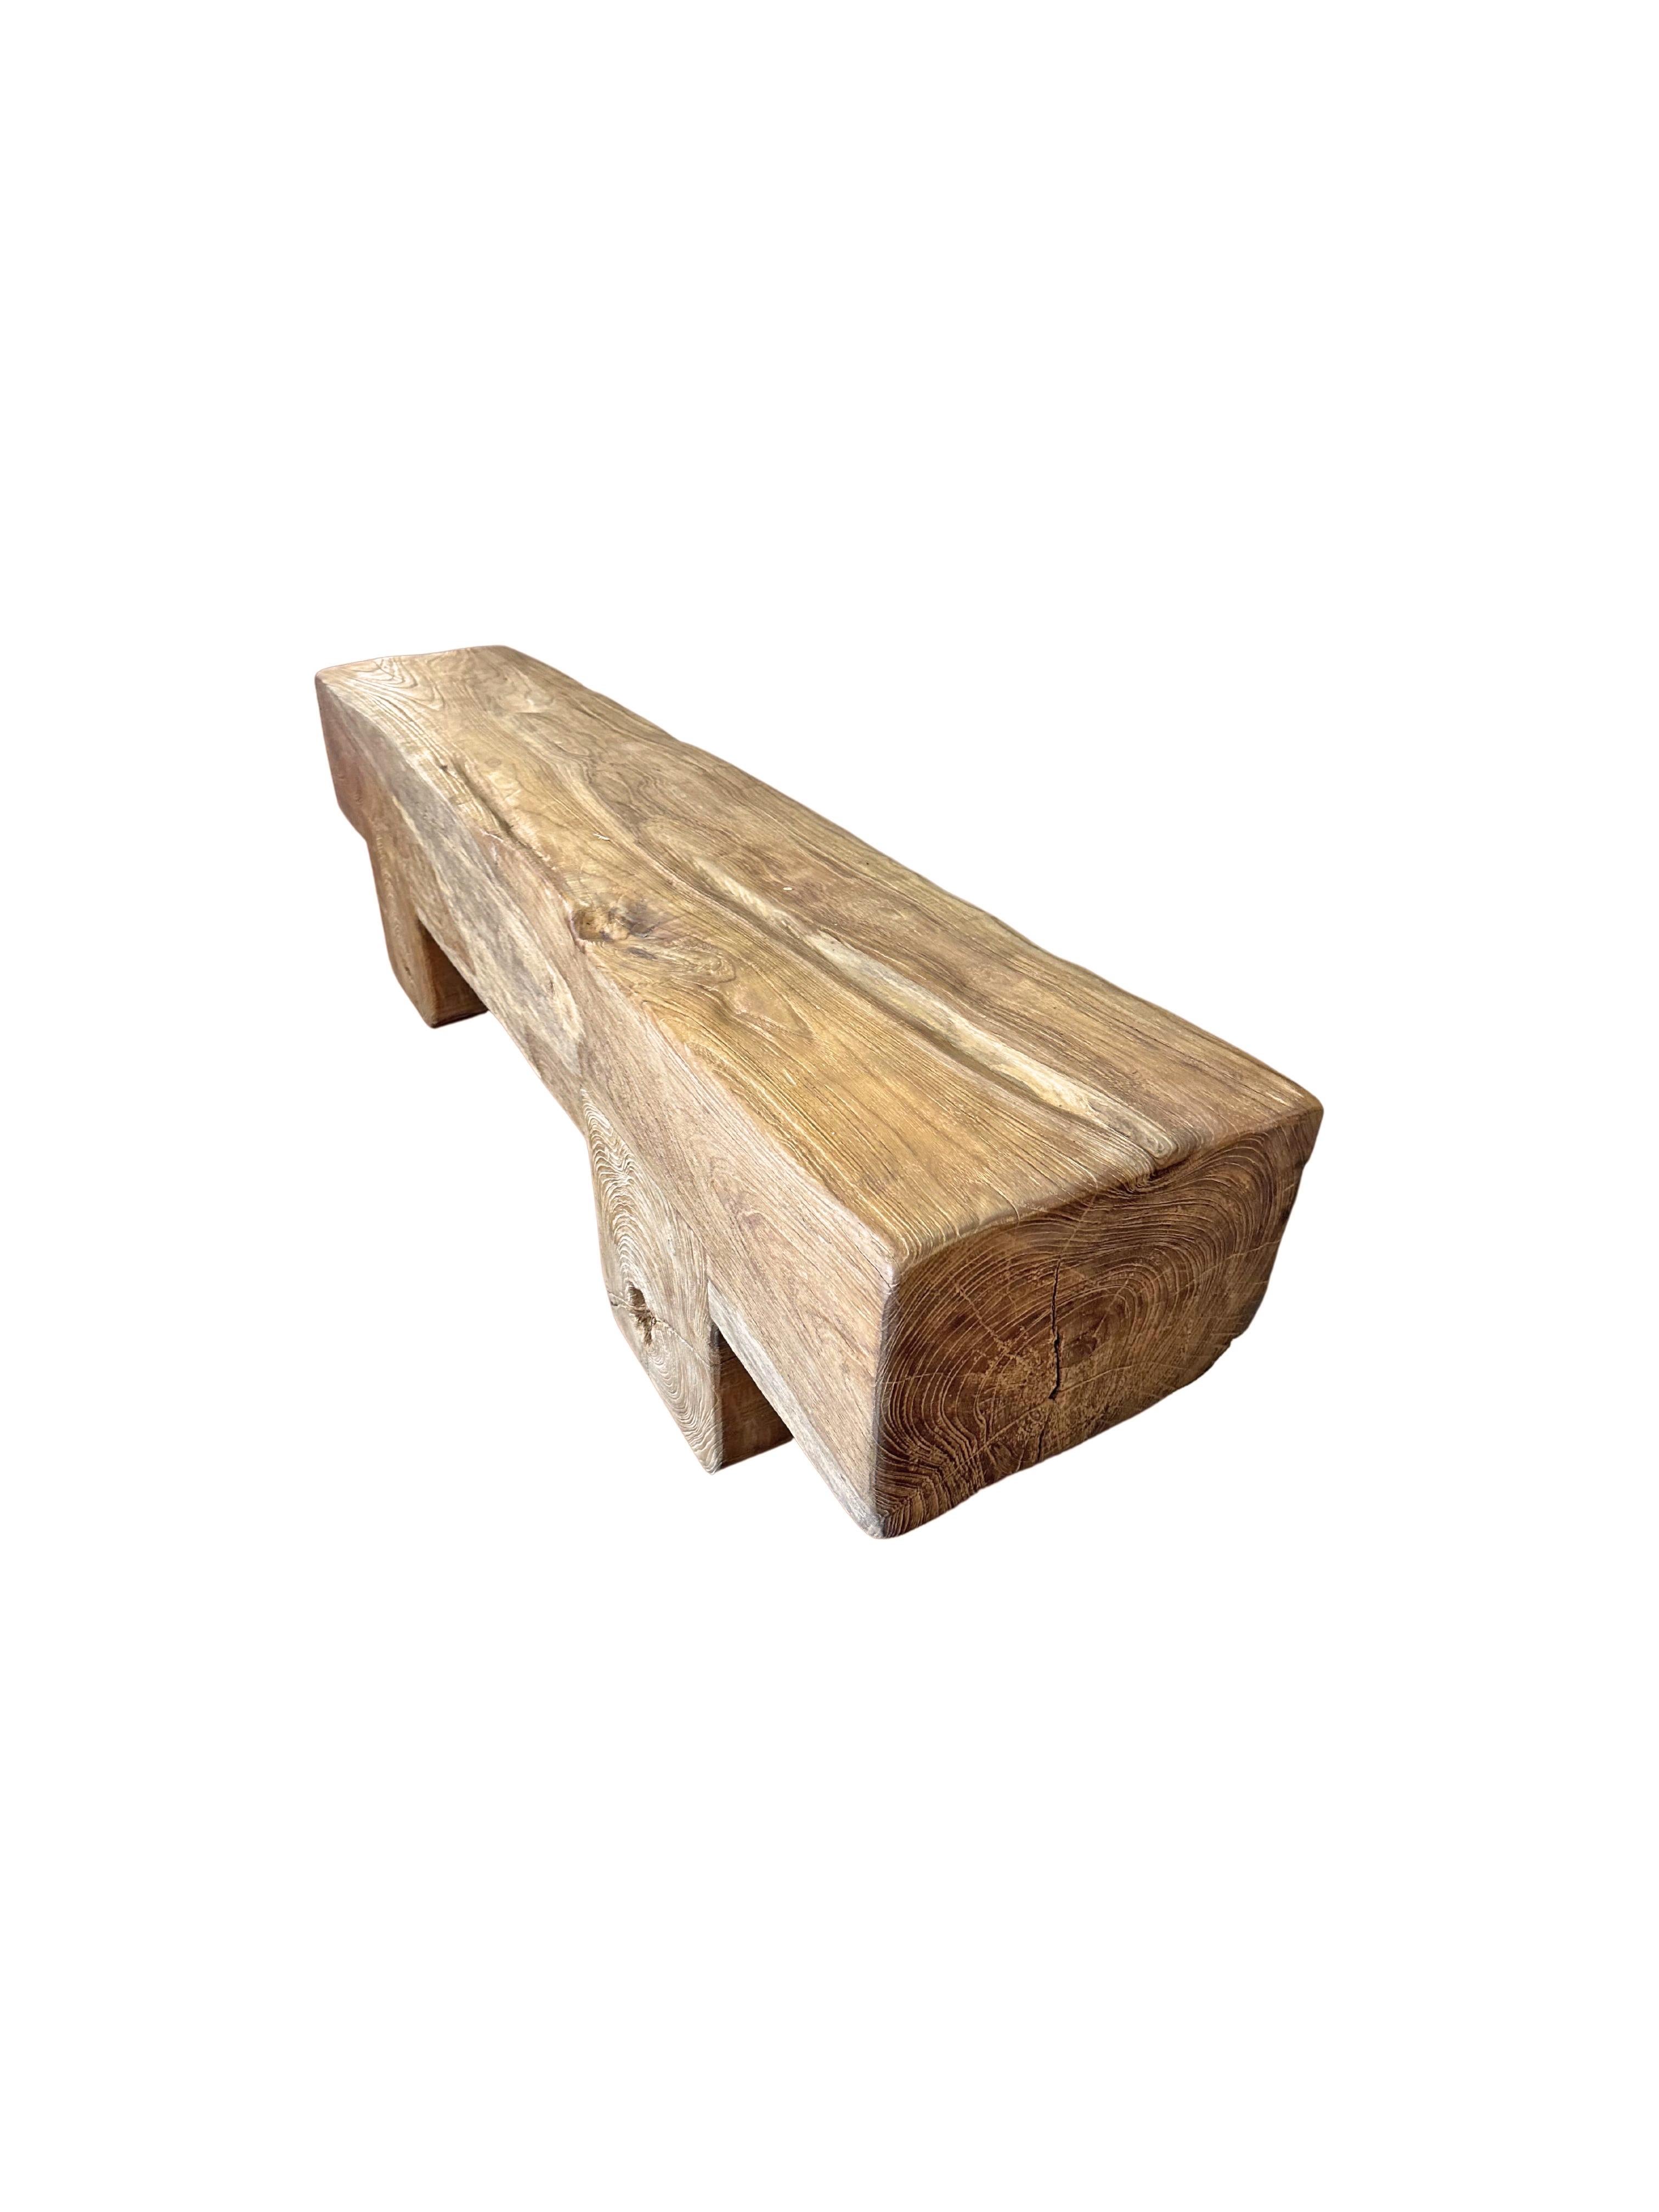 Contemporary Solid Teak Wood Sculptural Bench Modern Organic For Sale